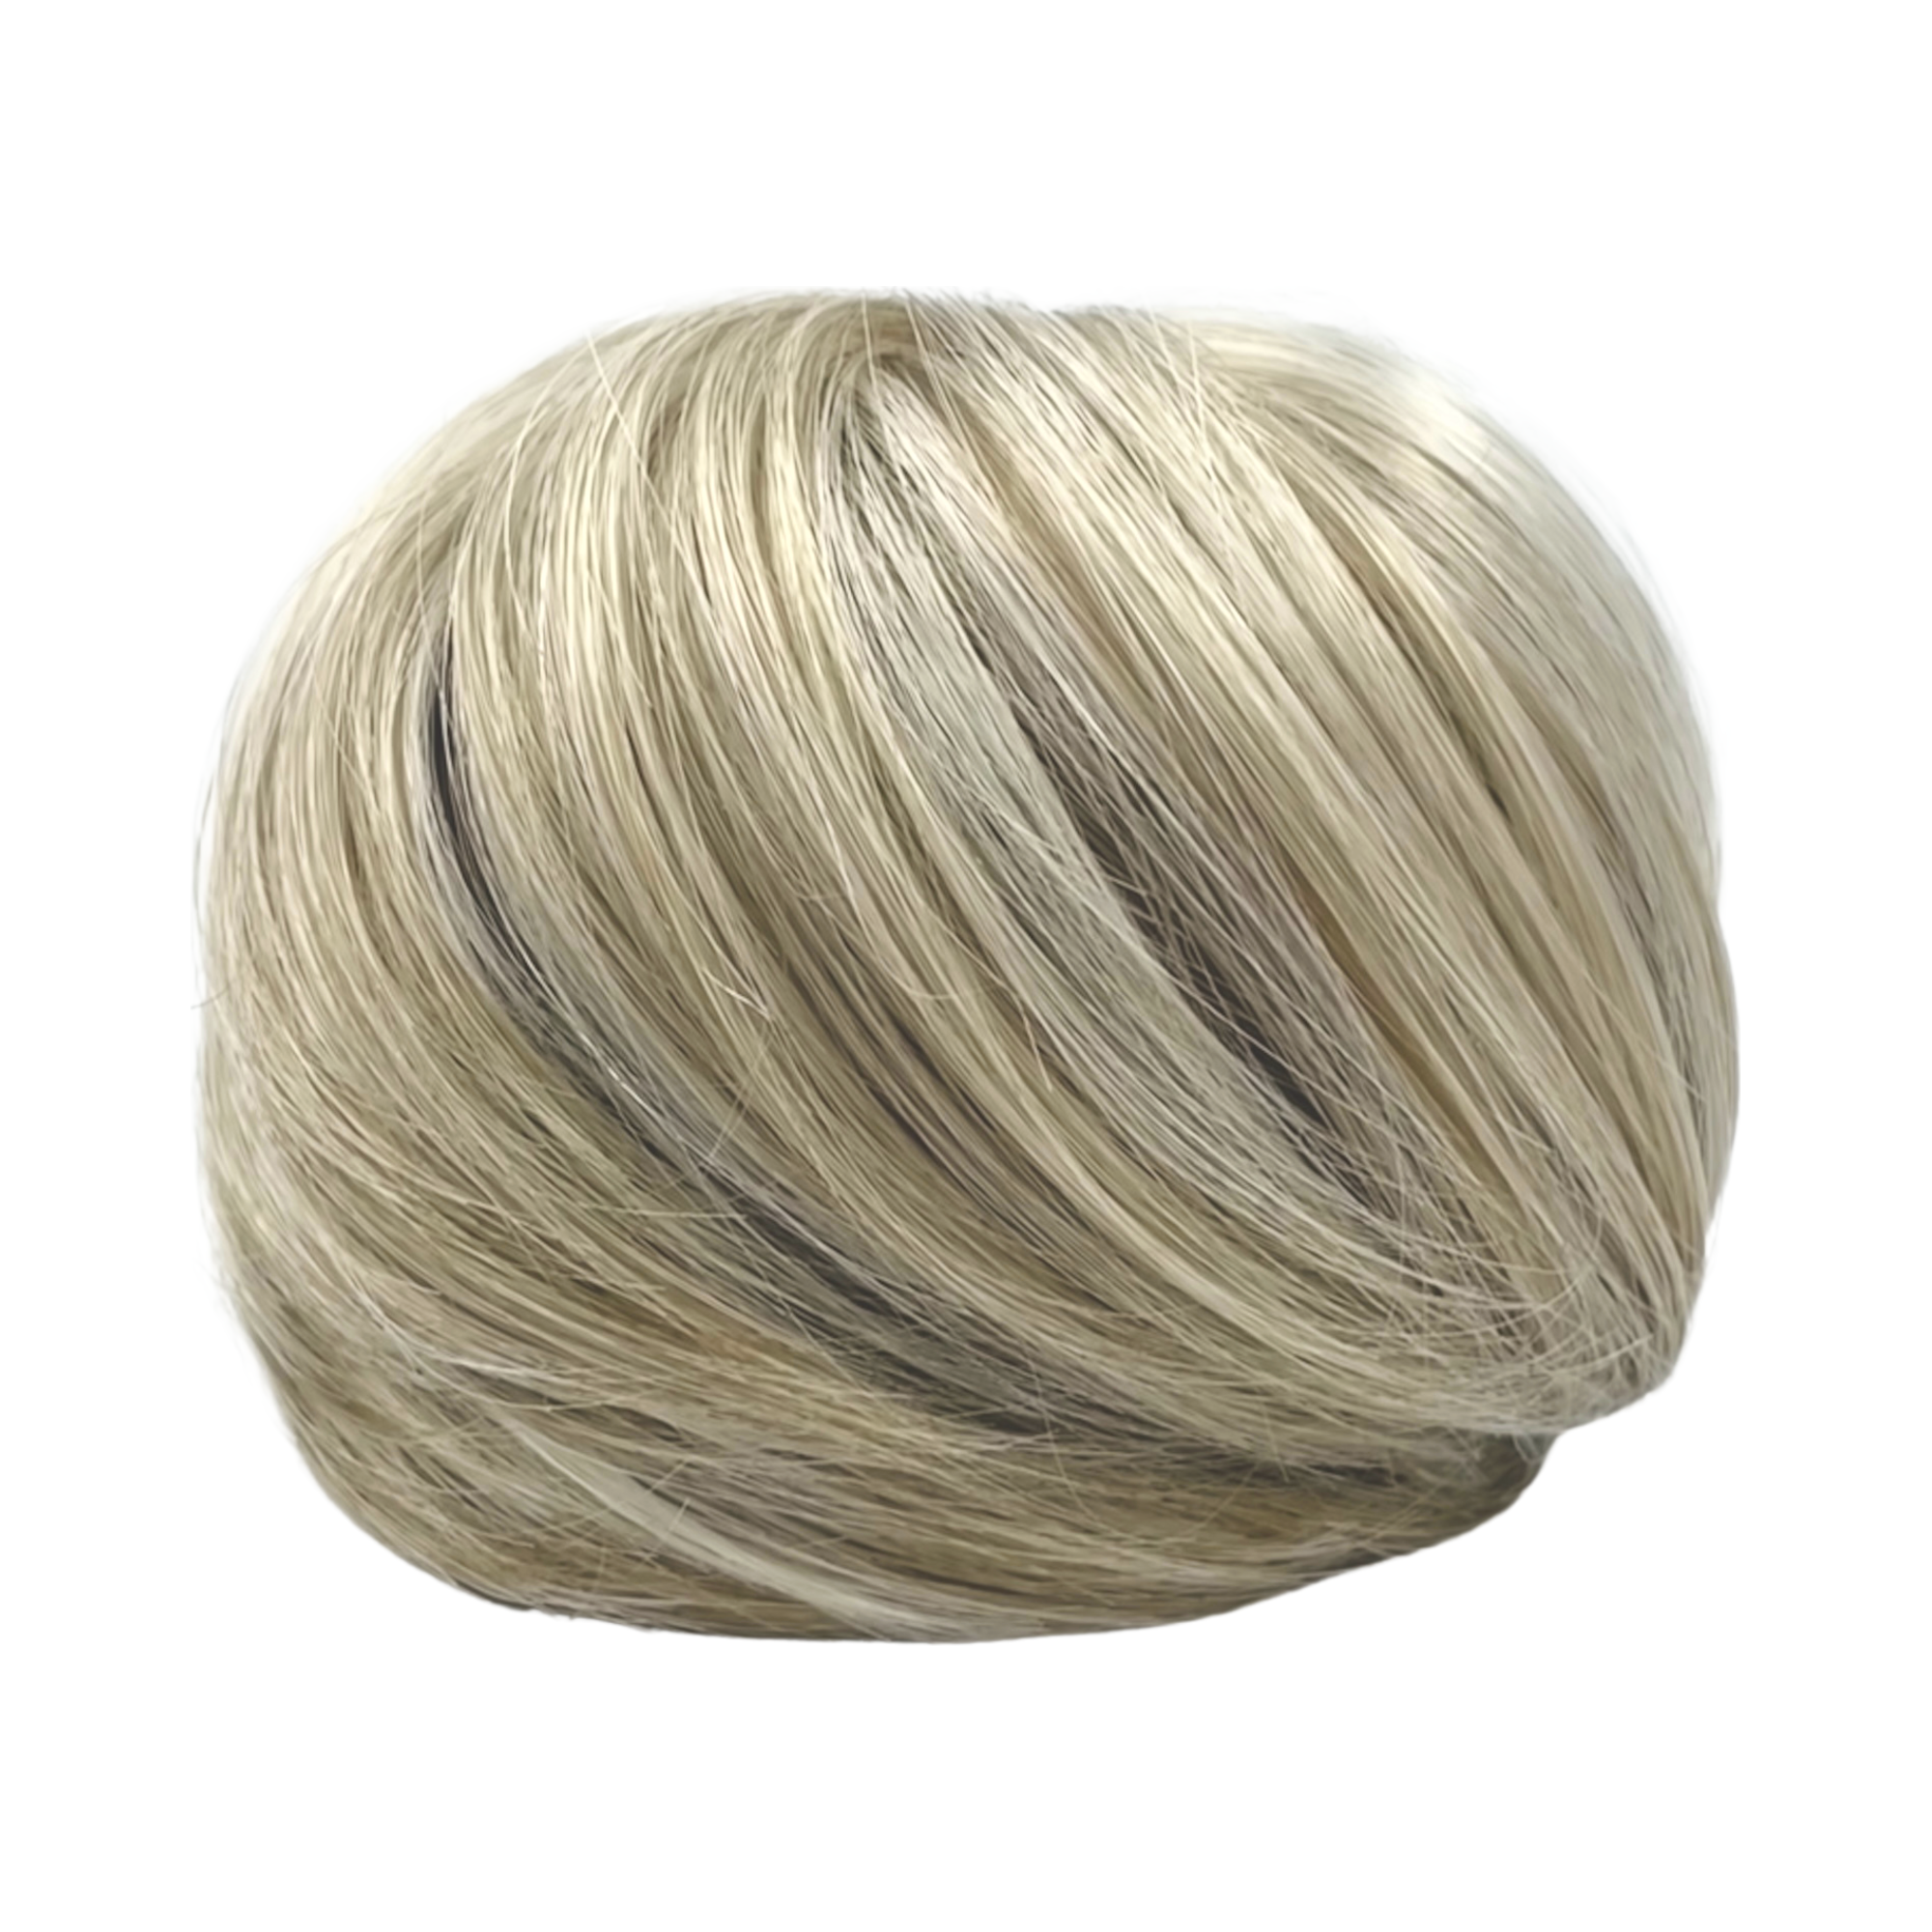 image of hair rehab london clip on bun hairpiece in shade steel blonde